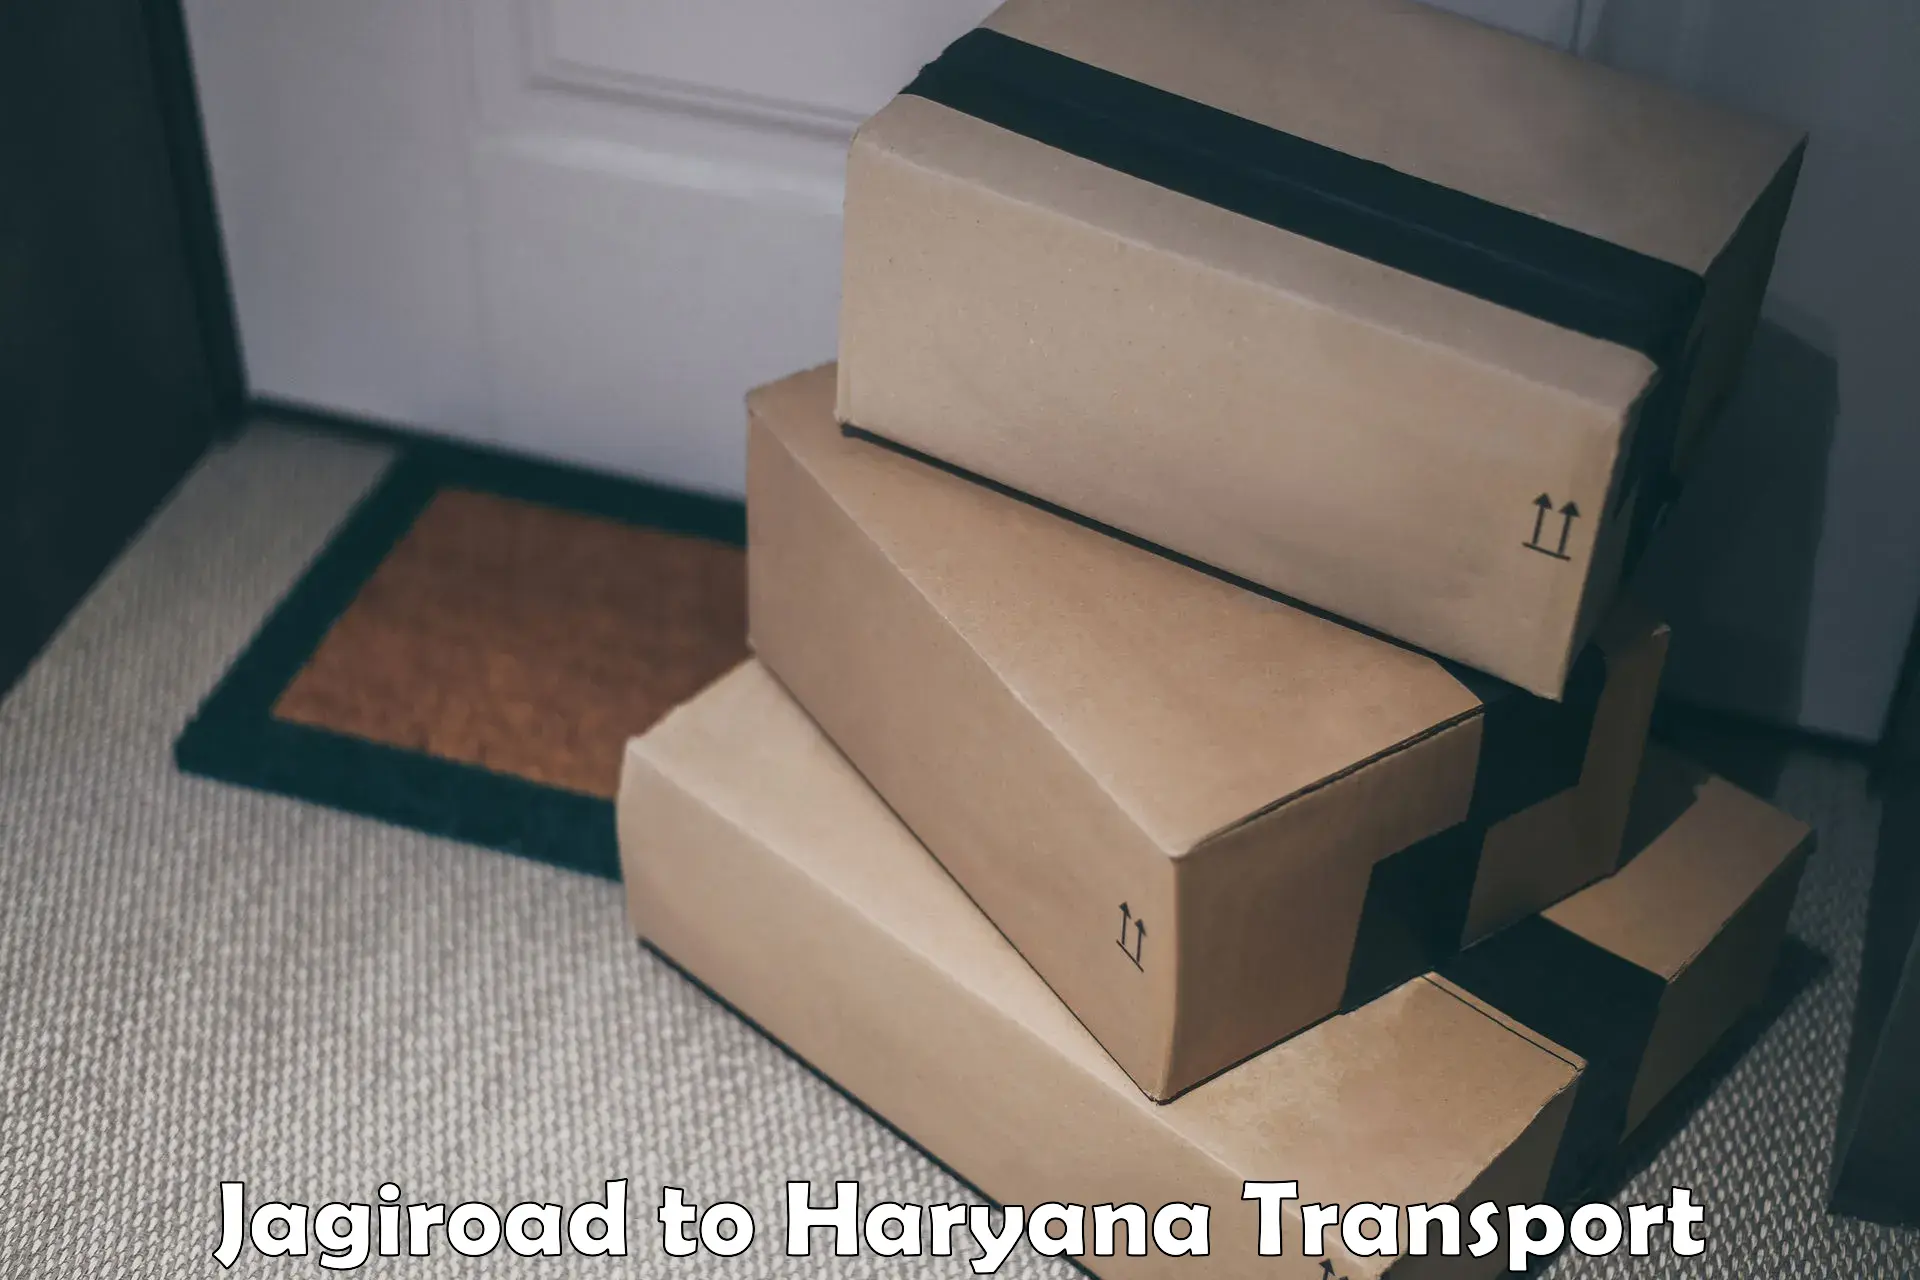 Transport shared services Jagiroad to NCR Haryana